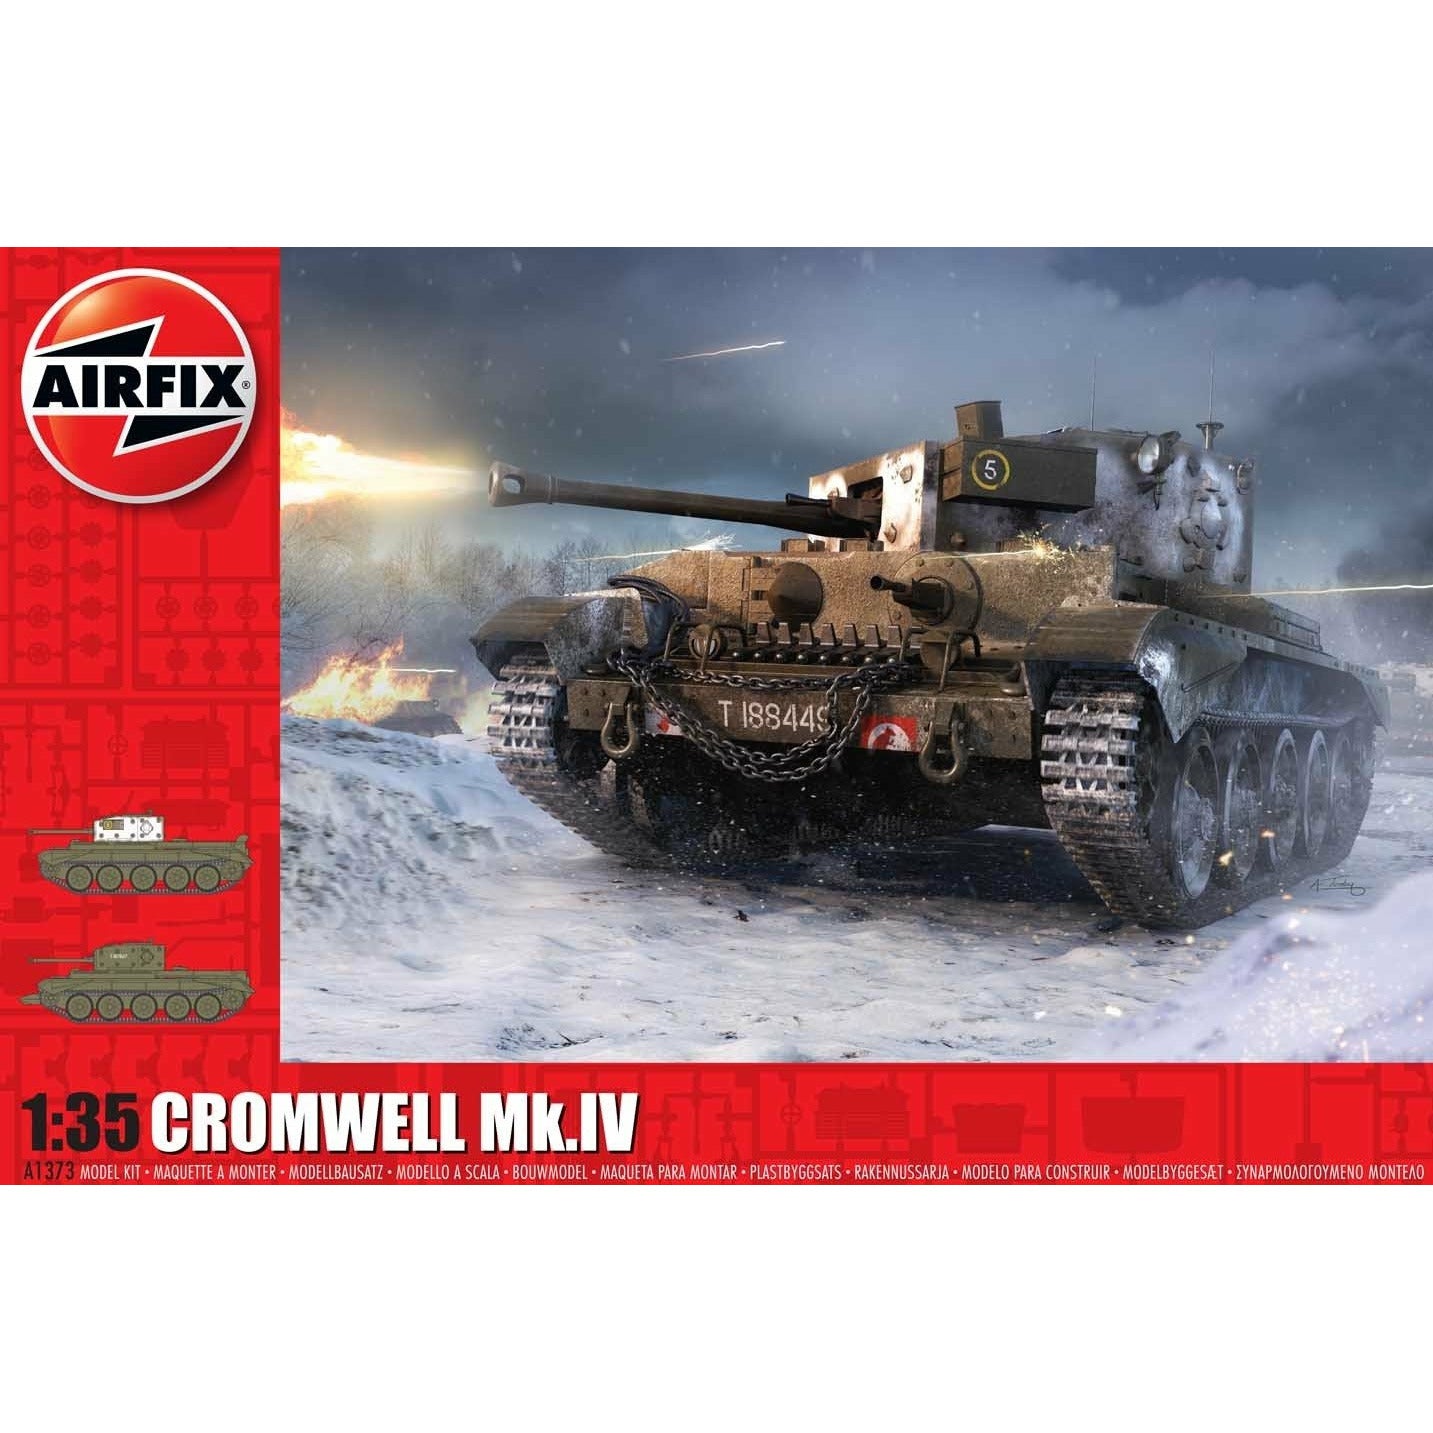 Cromwell Mk.IV 1/35 #A1373 by Airfix